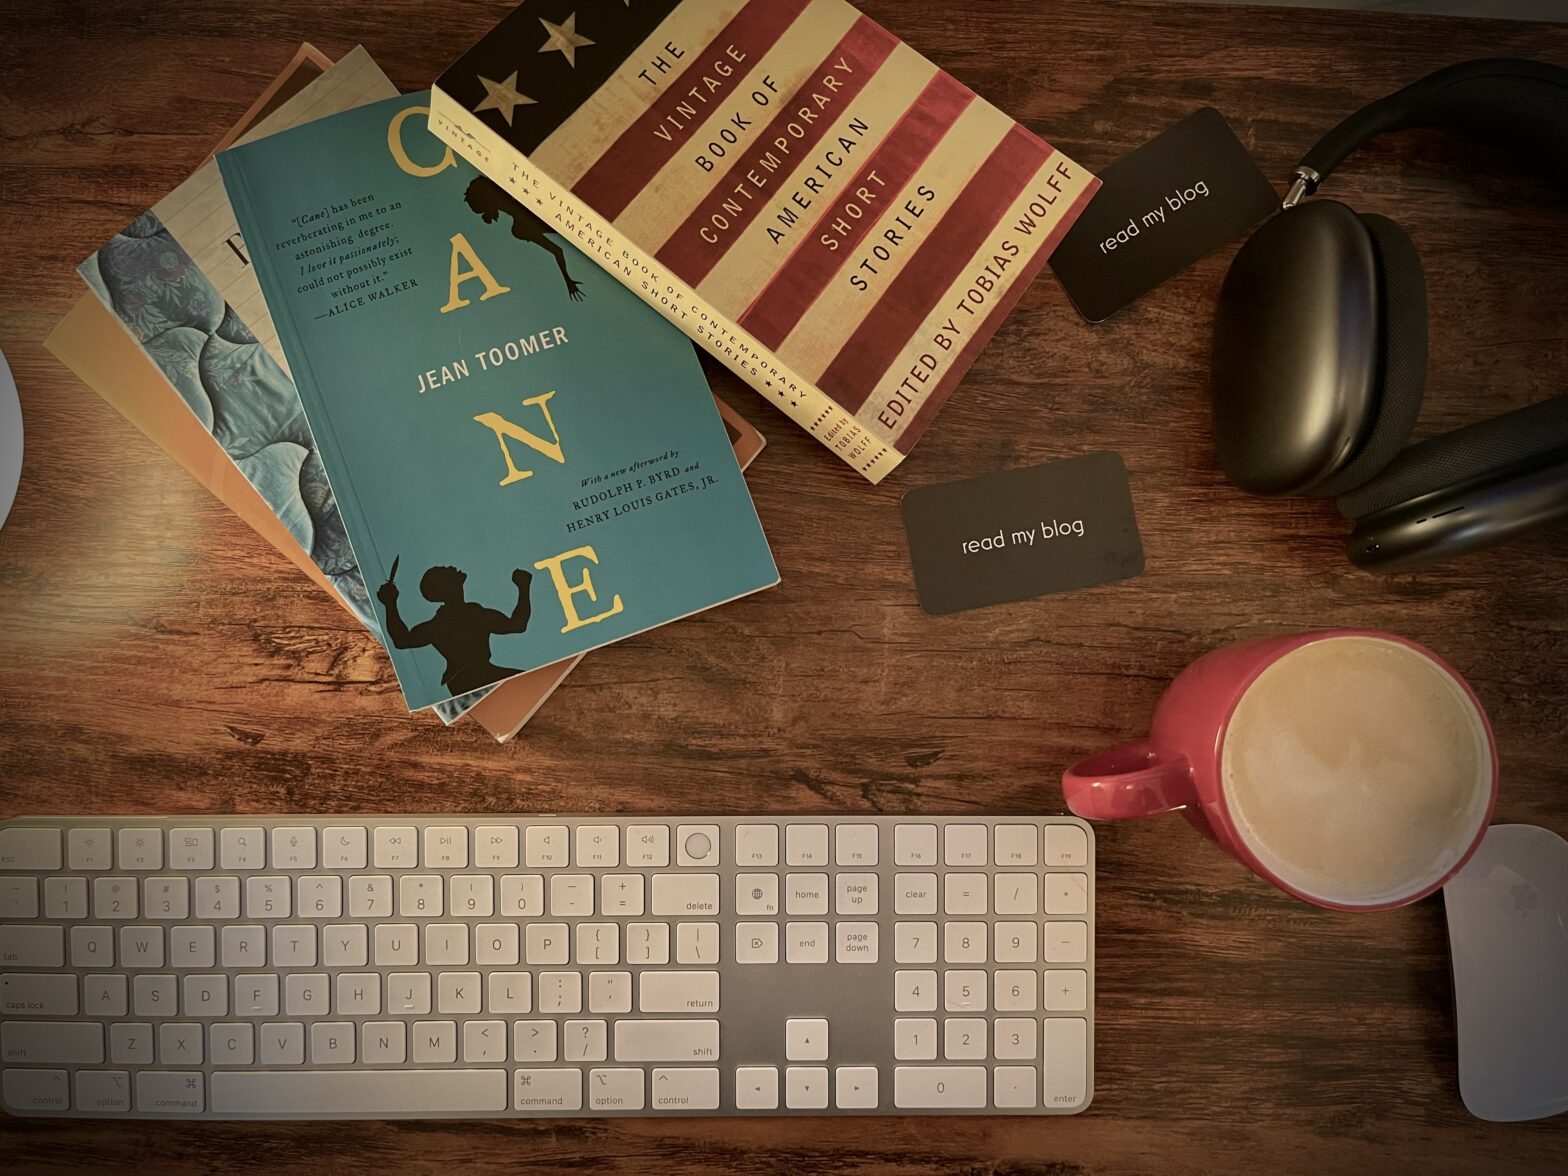 recommended books on desk